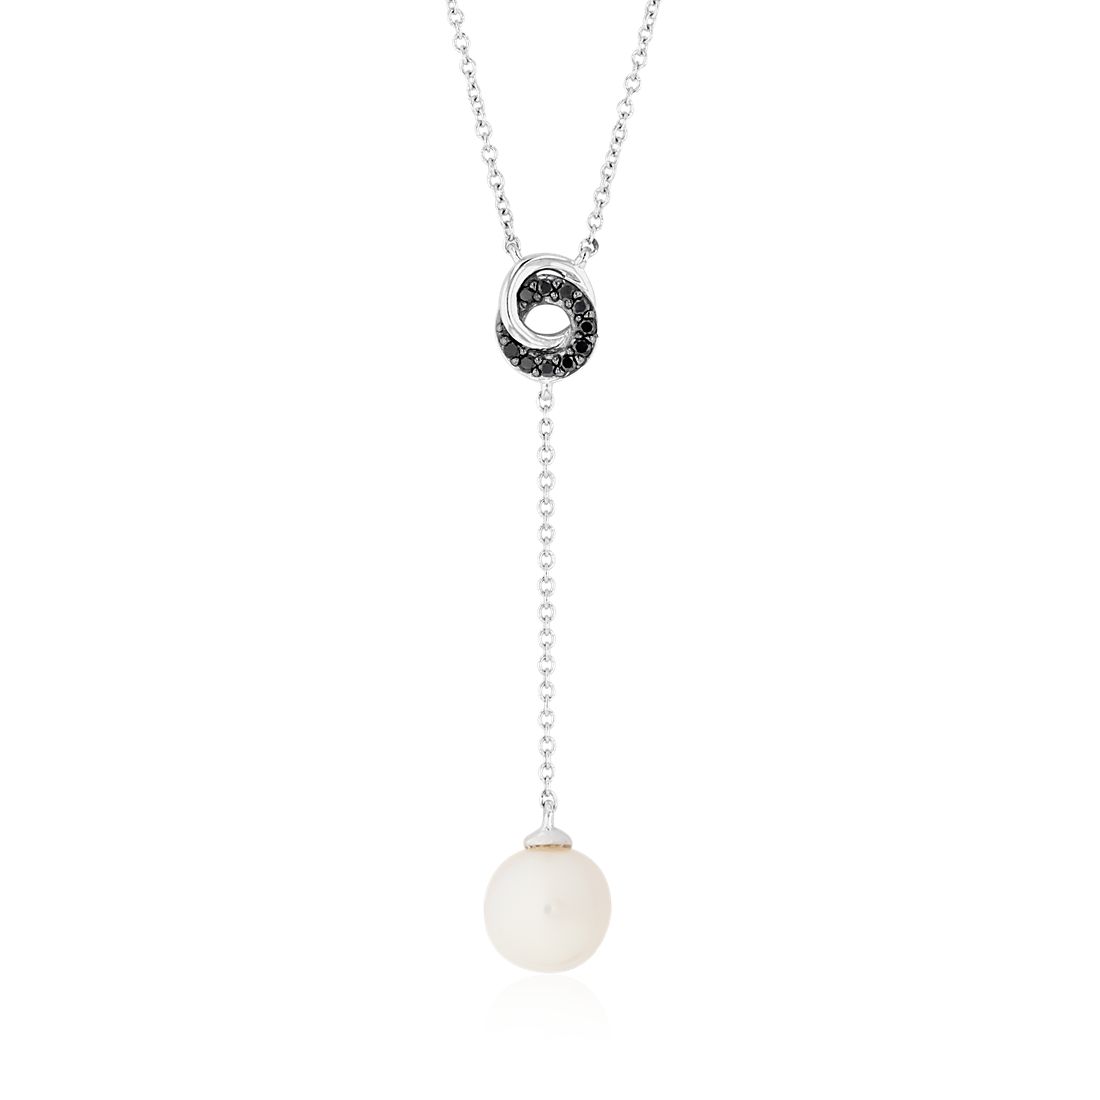 Freshwater Cultured Pearl Drop Pendant and Black Diamond Love Knot by Blue Nile